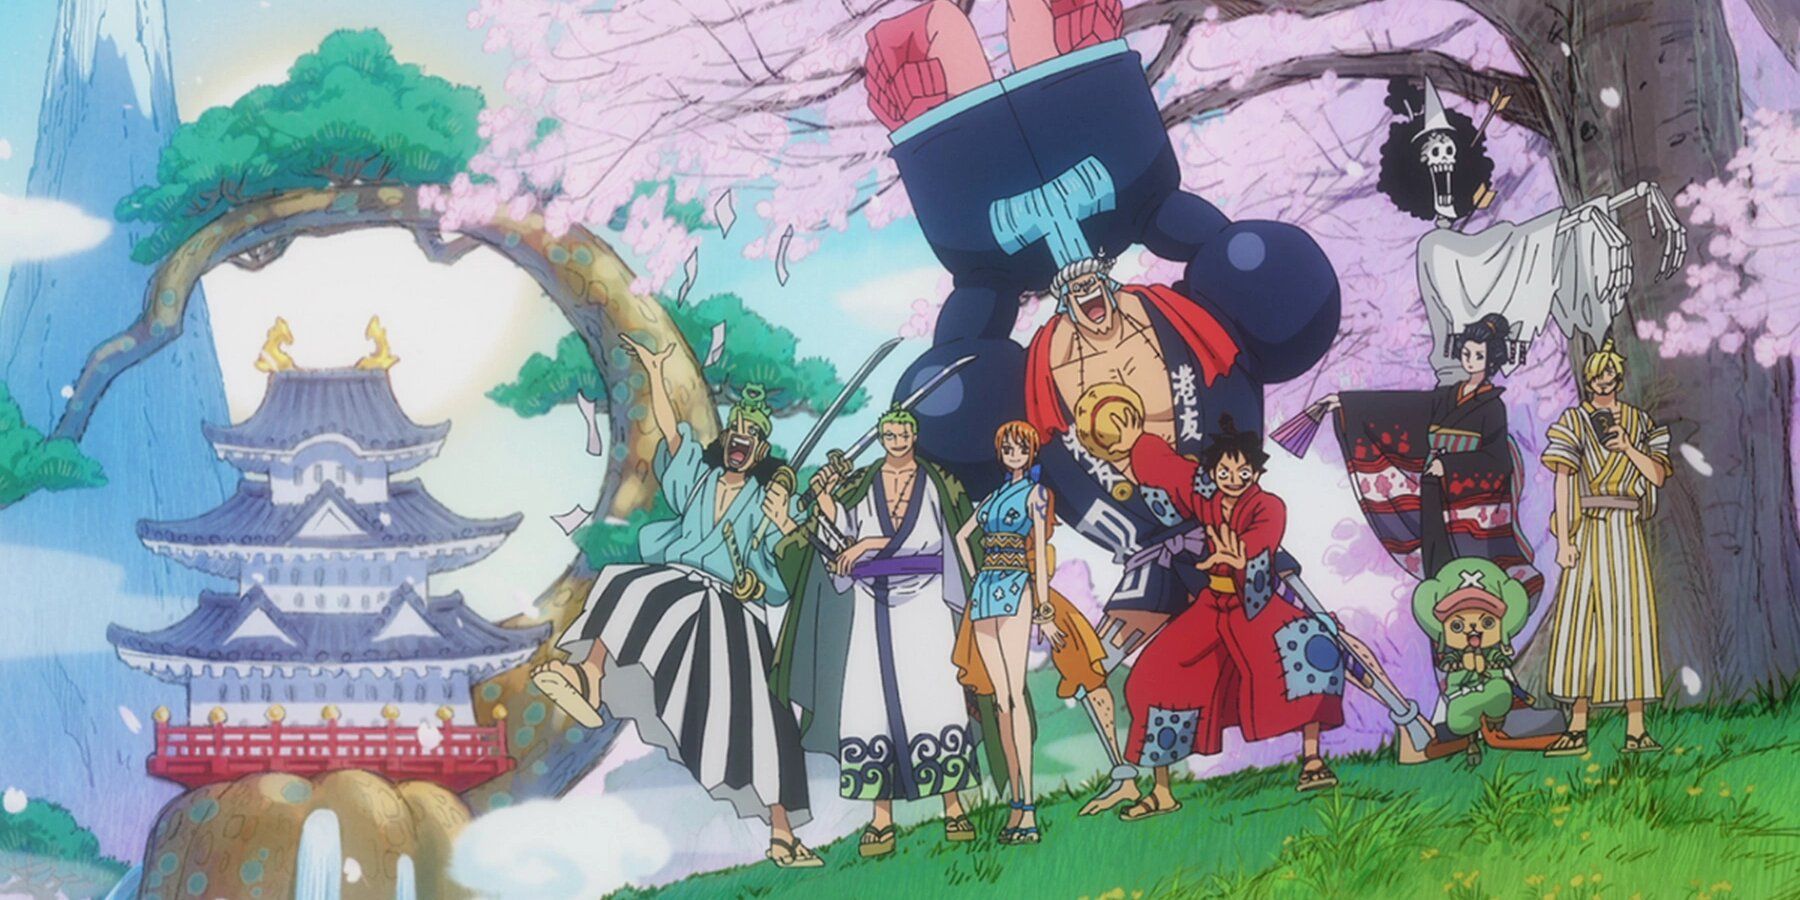 The Straw Hats in Wano